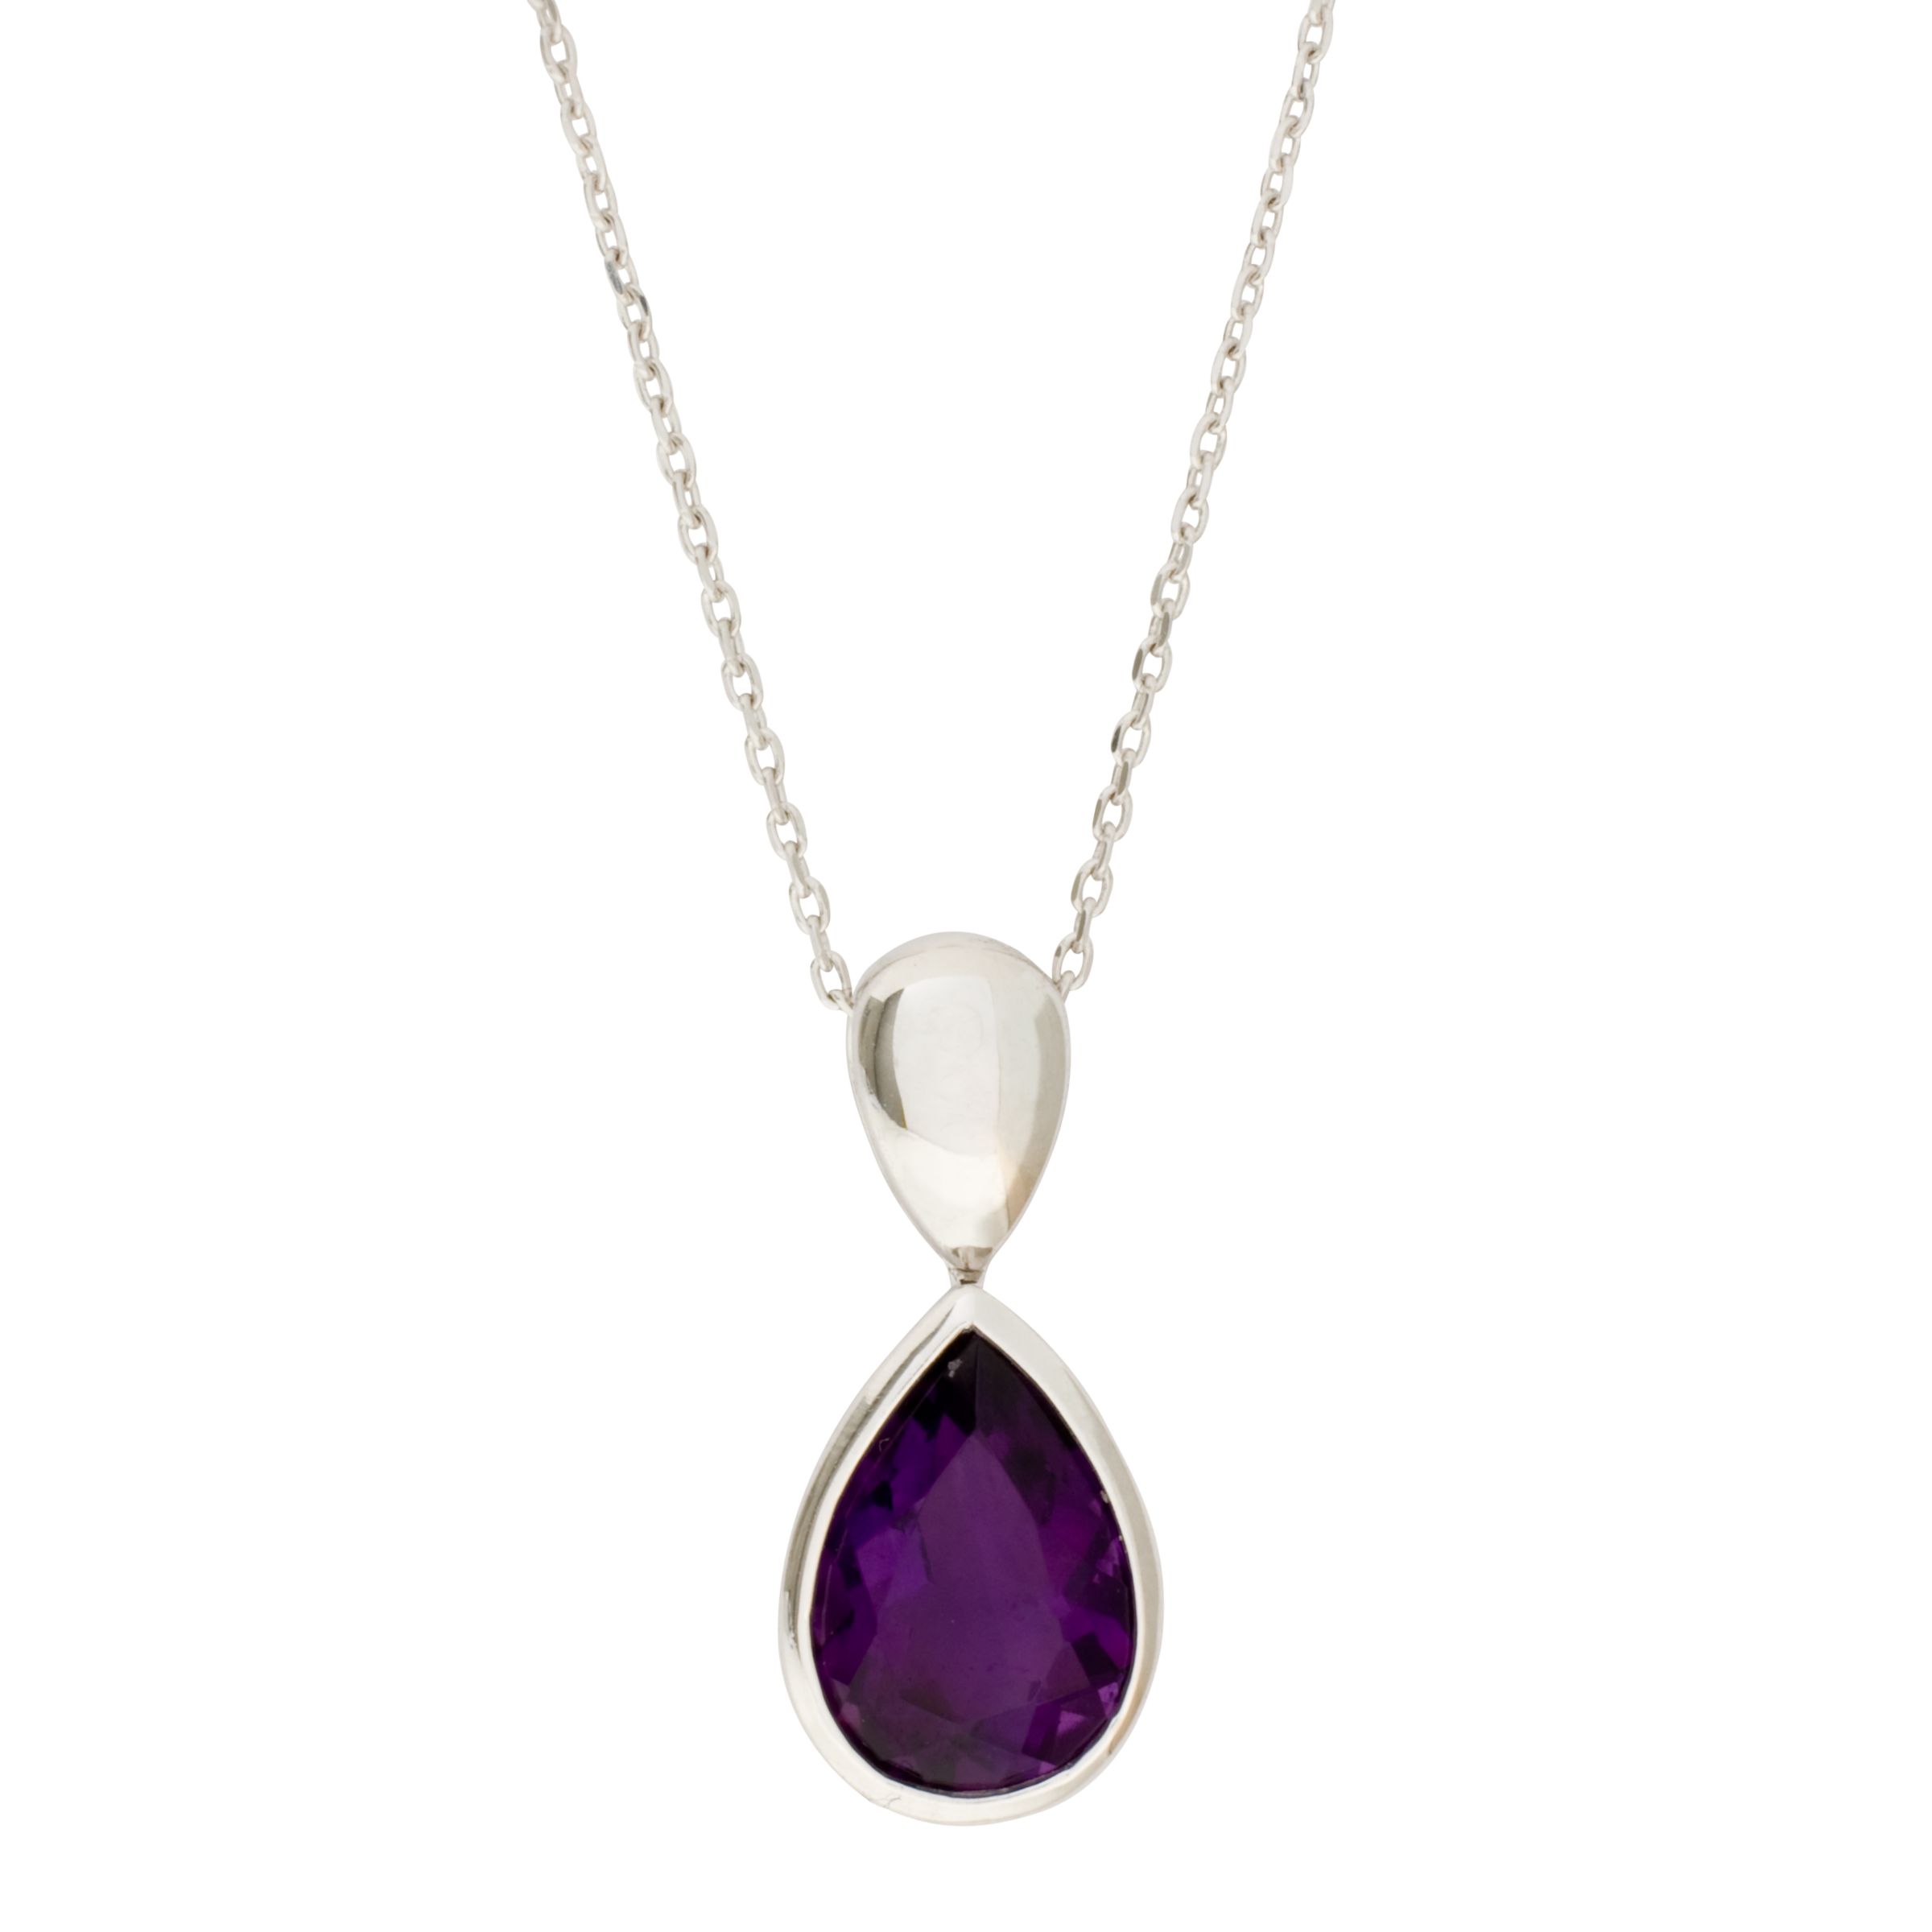 White Gold Amethyst Pendant Necklace 61053